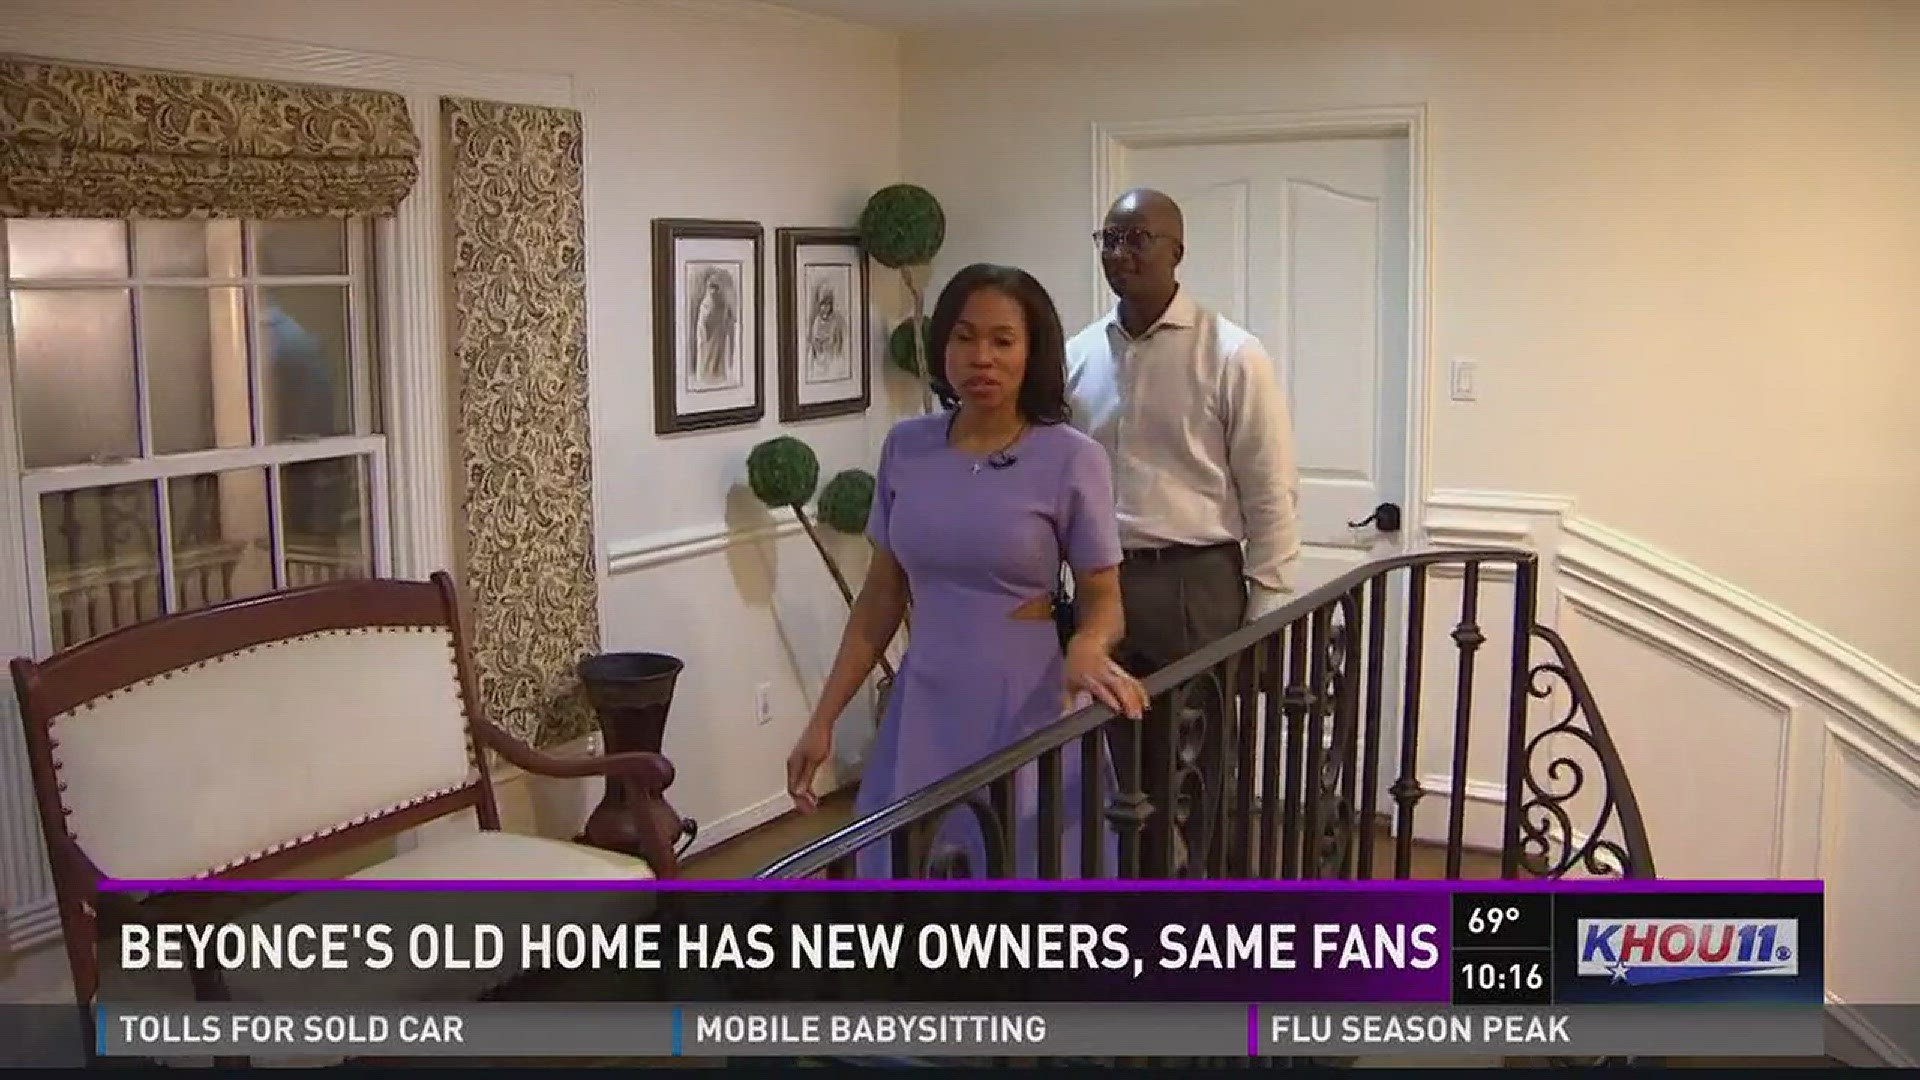 Beyonce's childhood home has new owners but they say her fans show up at all hours of the day. KHOU anchor Len Cannon talks to the Houston couple and gets an inside look at the home.